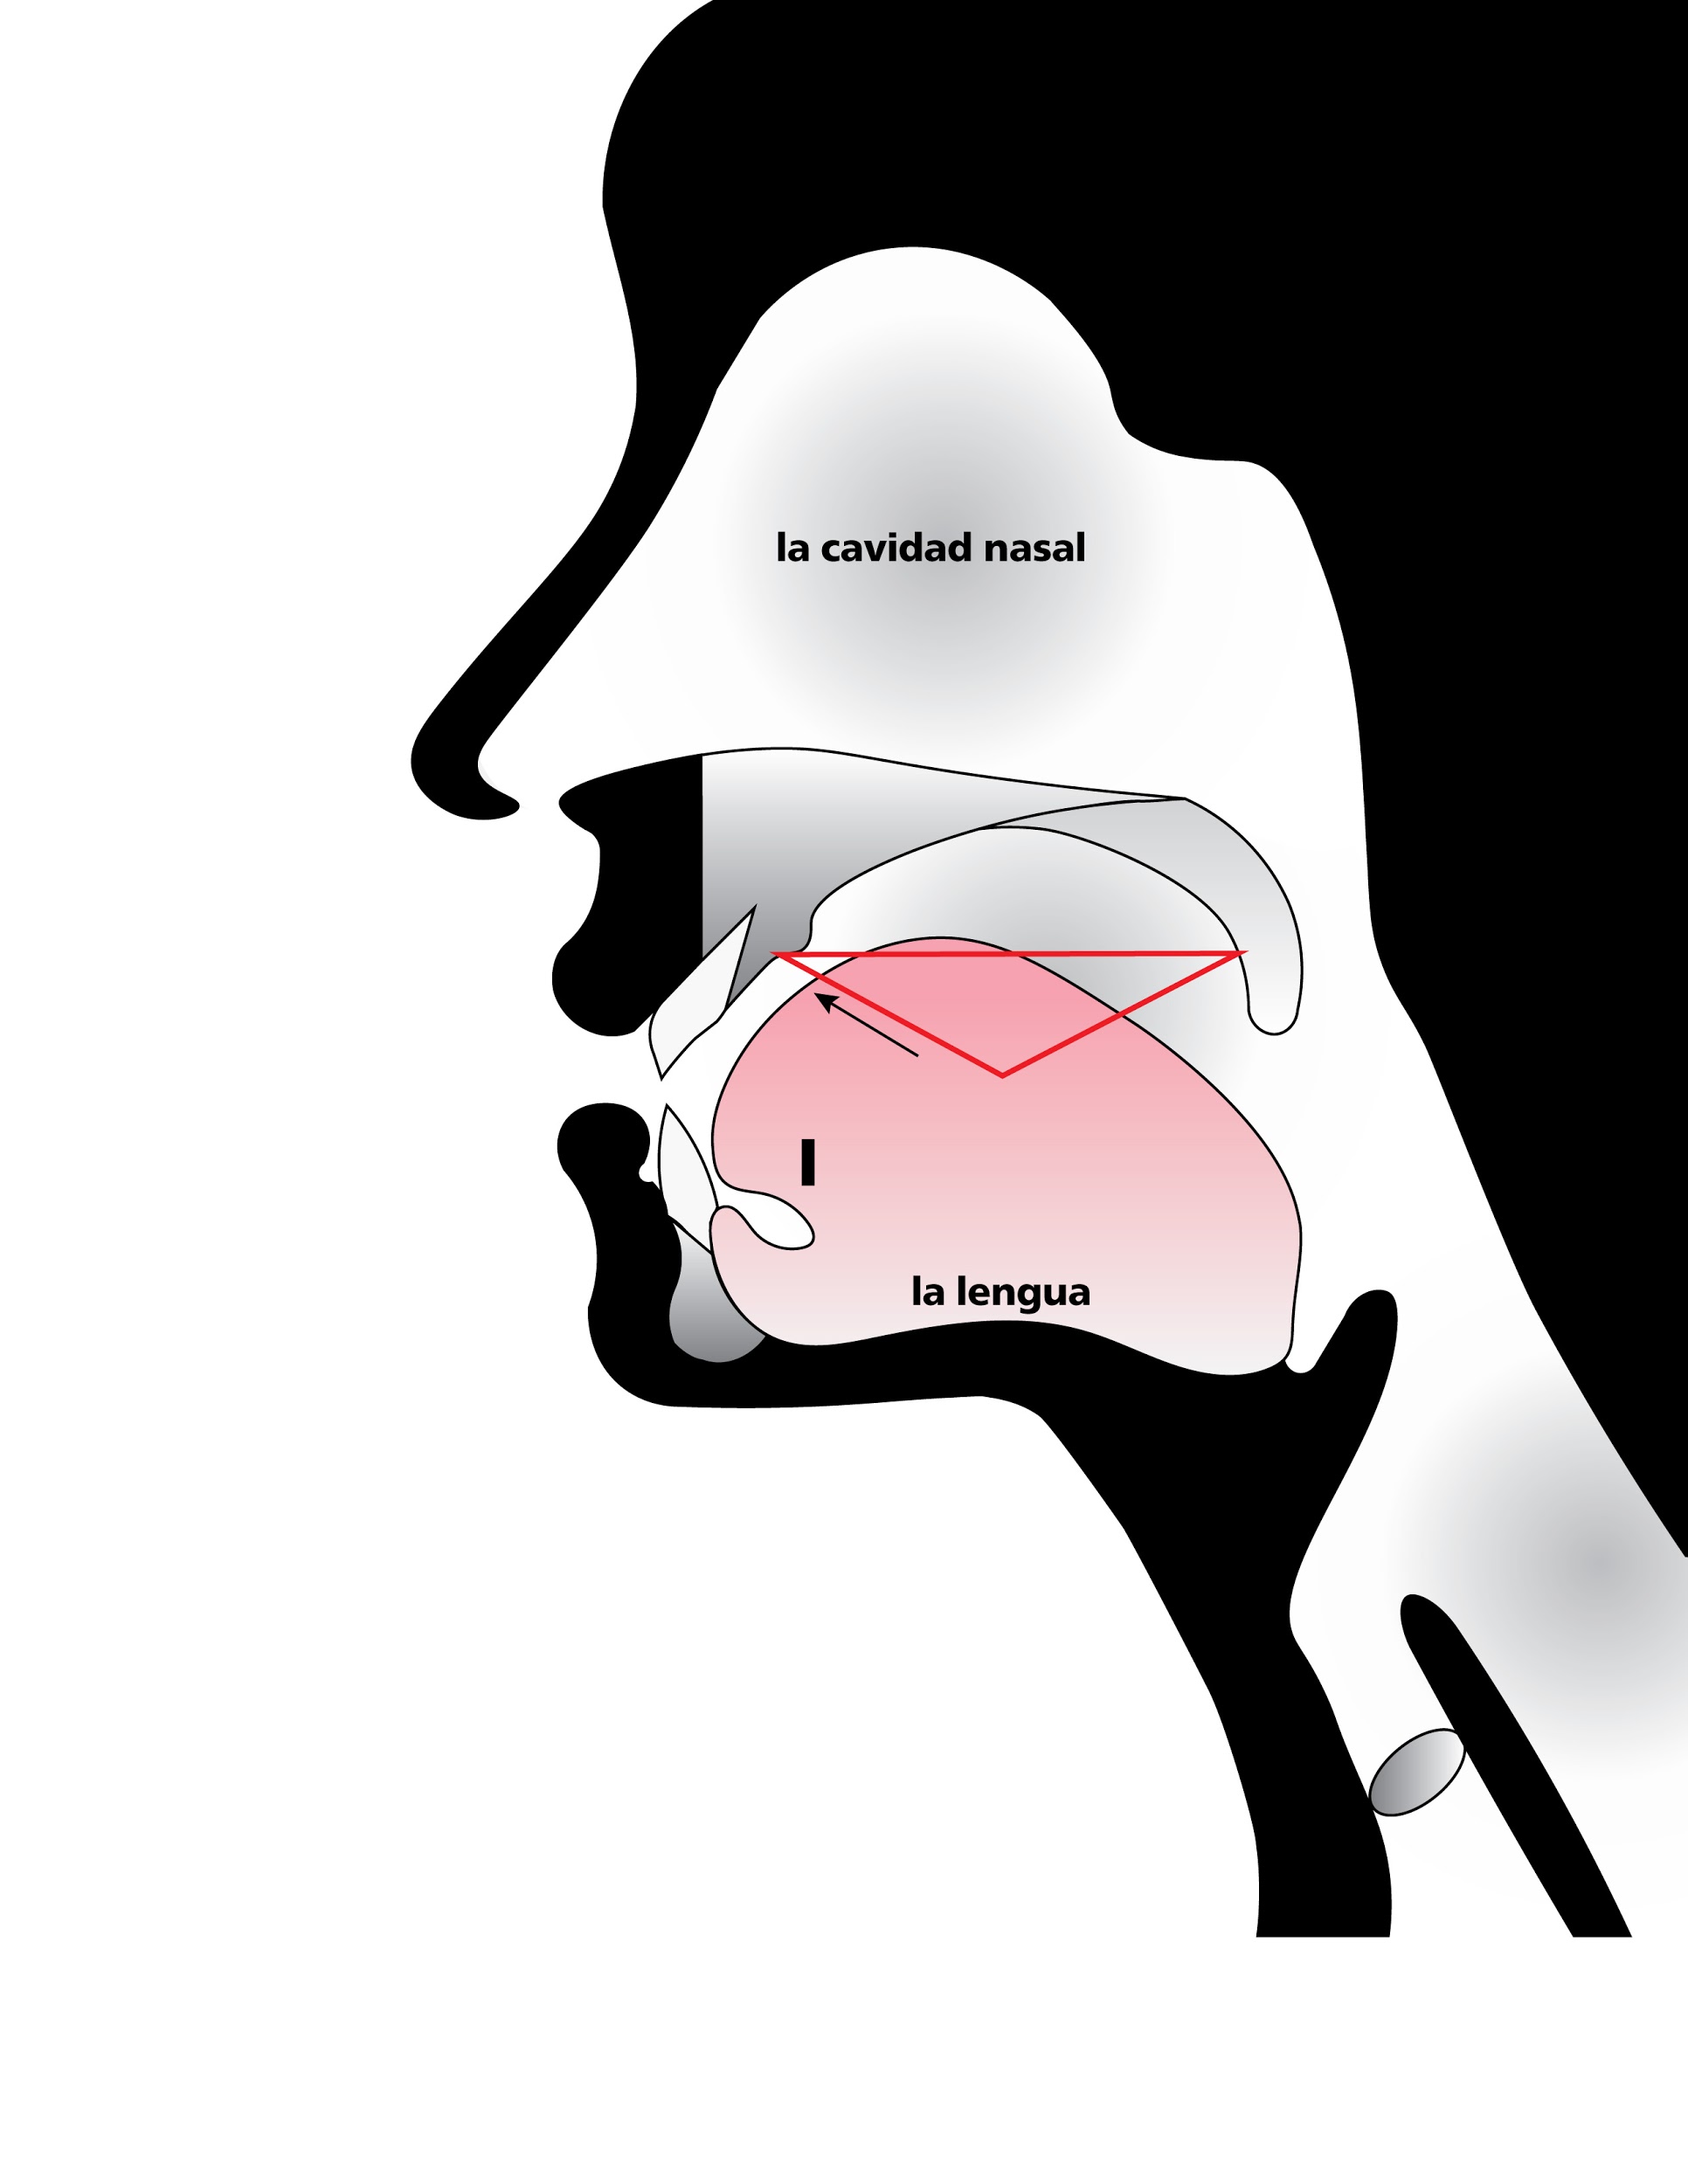 Anatomical sketch of head while speaking, emphasizing space of roof of mouth when tongue fully raised, in Spanish